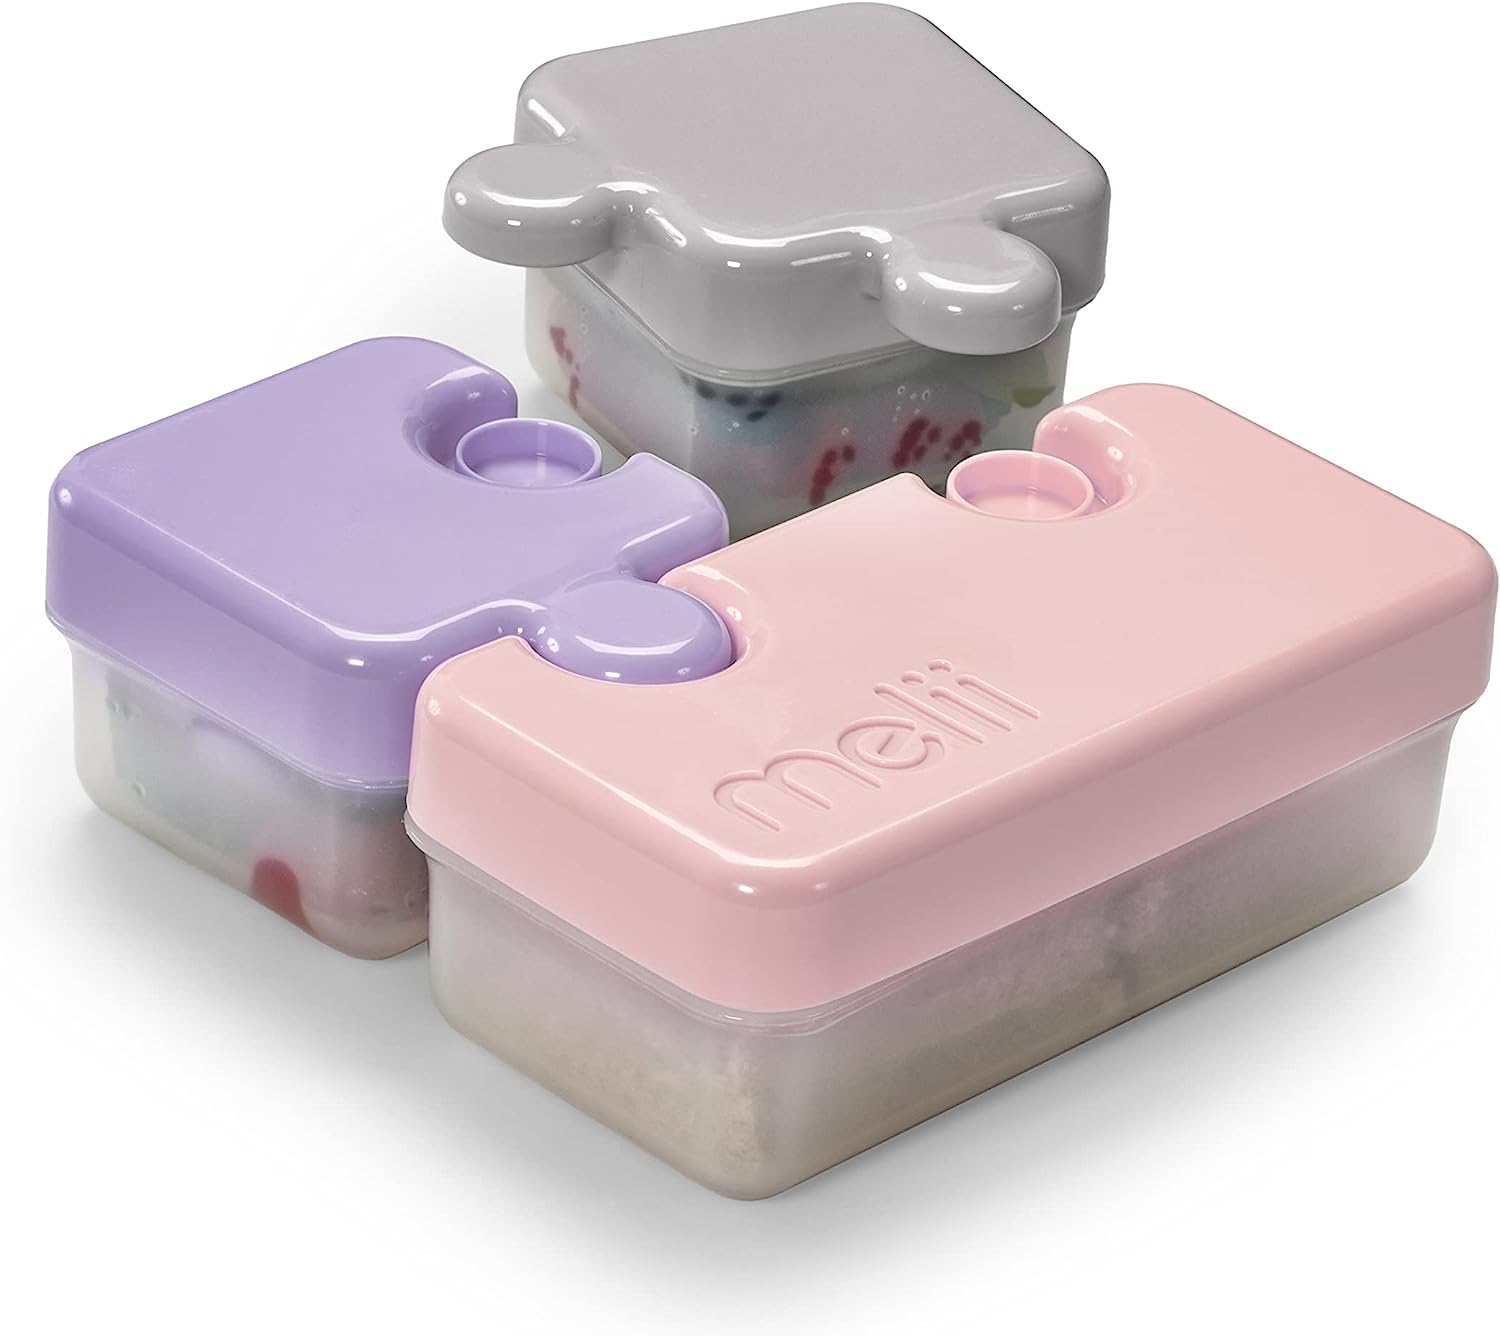 Melii Puzzle Container - Pink, Purple, Grey.